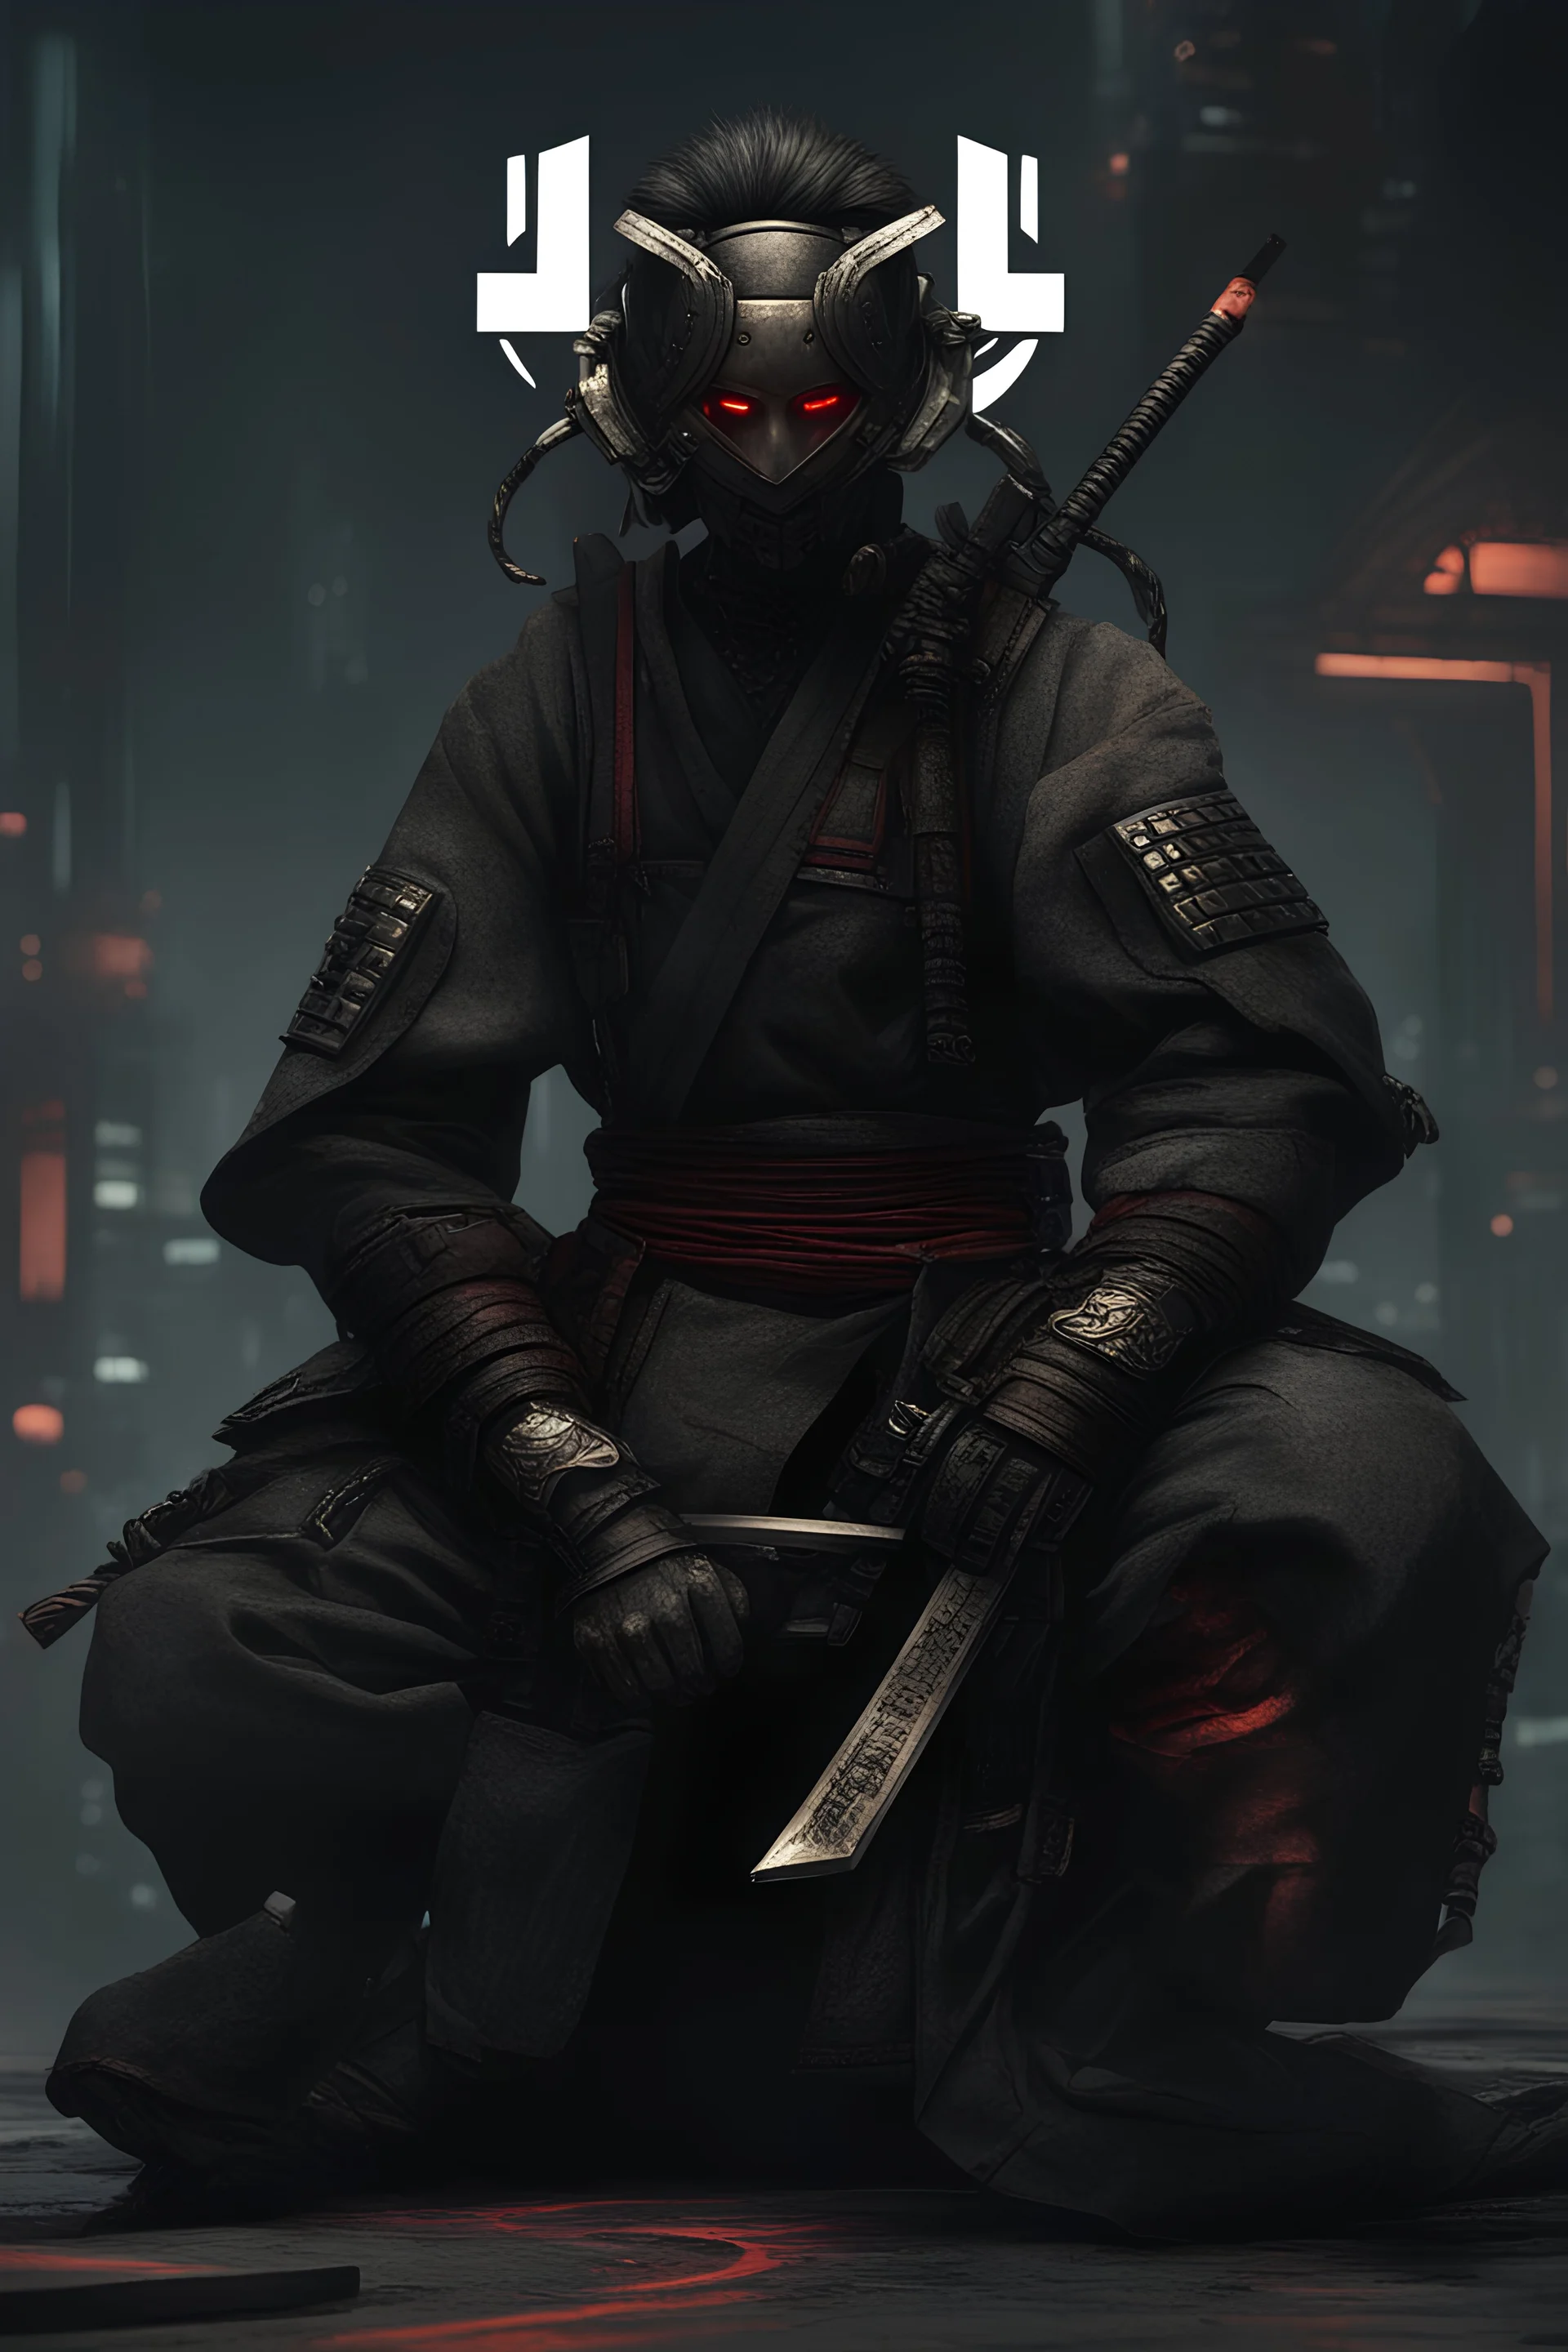 cyberpunk male samurai with the letter m on his mask